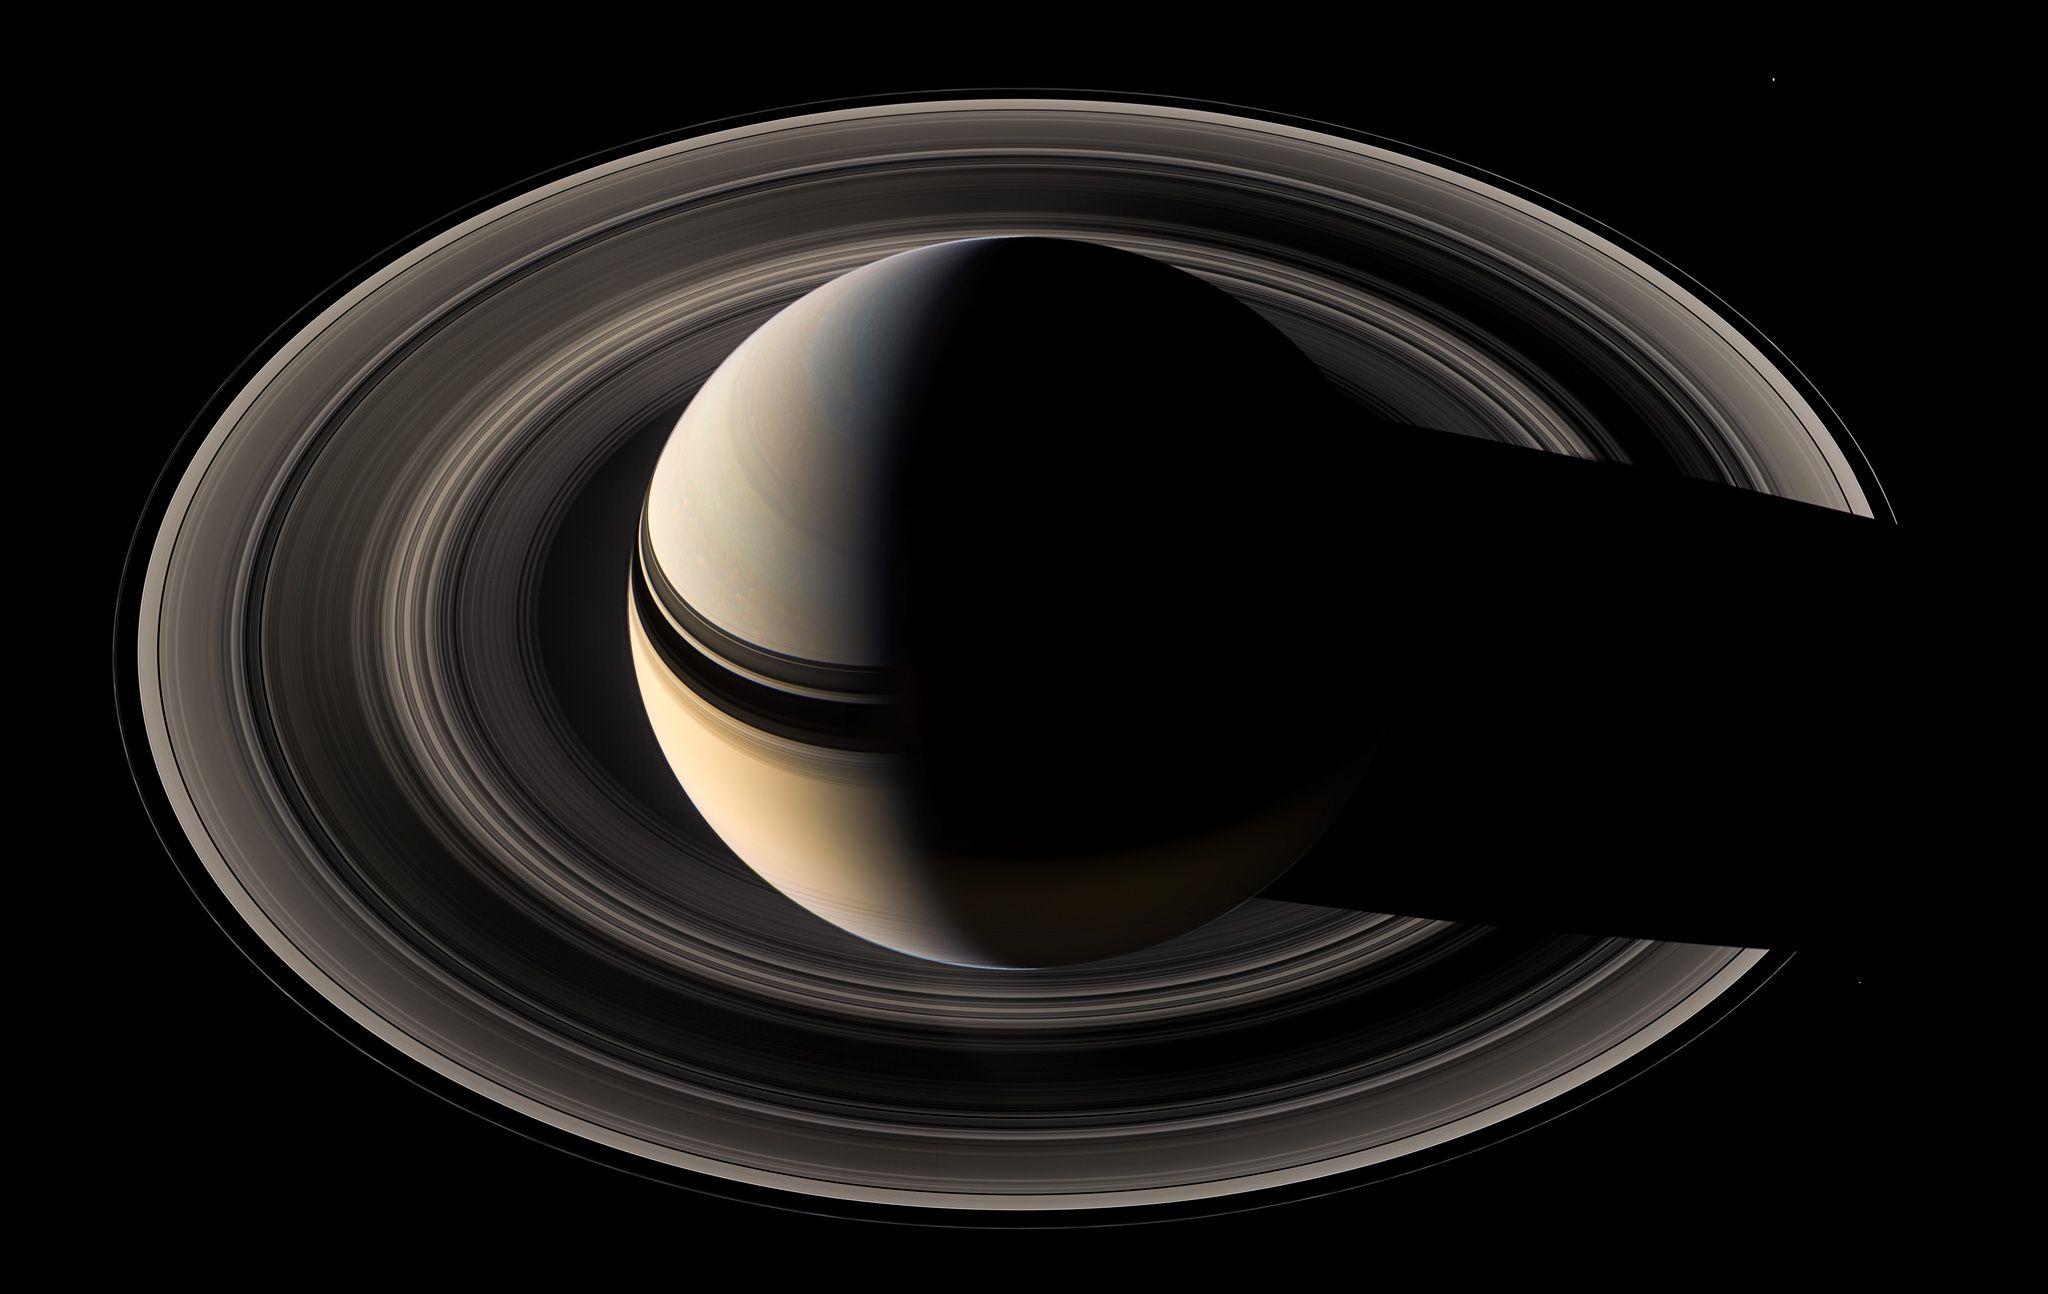 Ten Best Picture From NASA's Cassini Probe—Saturn and More